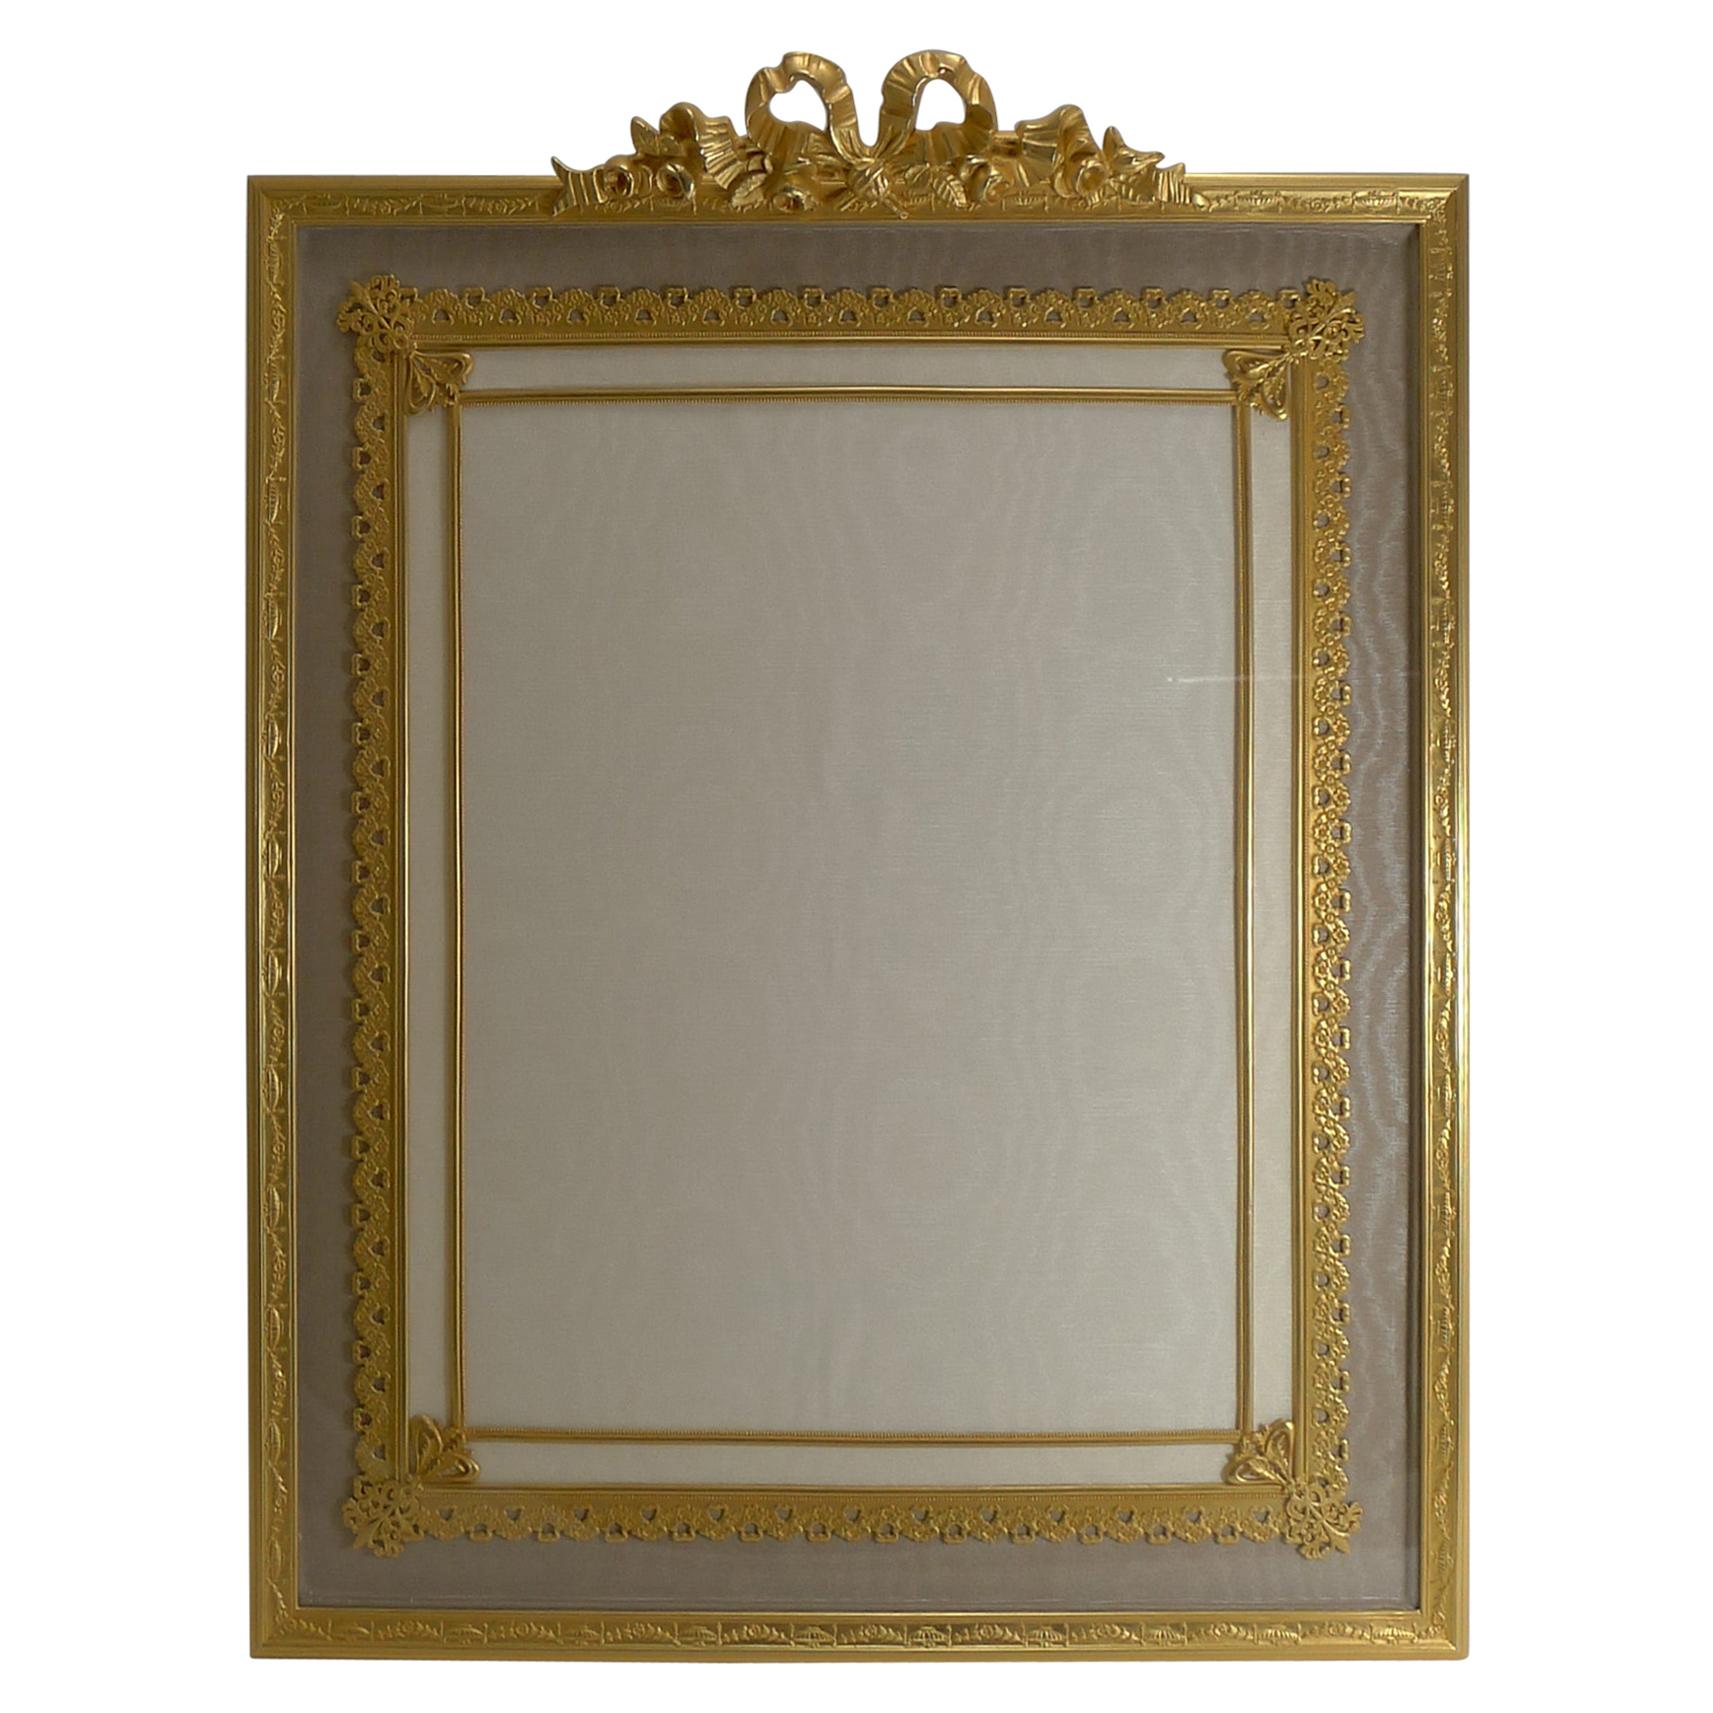 Grandest Antique French Gilded Bronze Photograph / Picture Frame, circa 1900